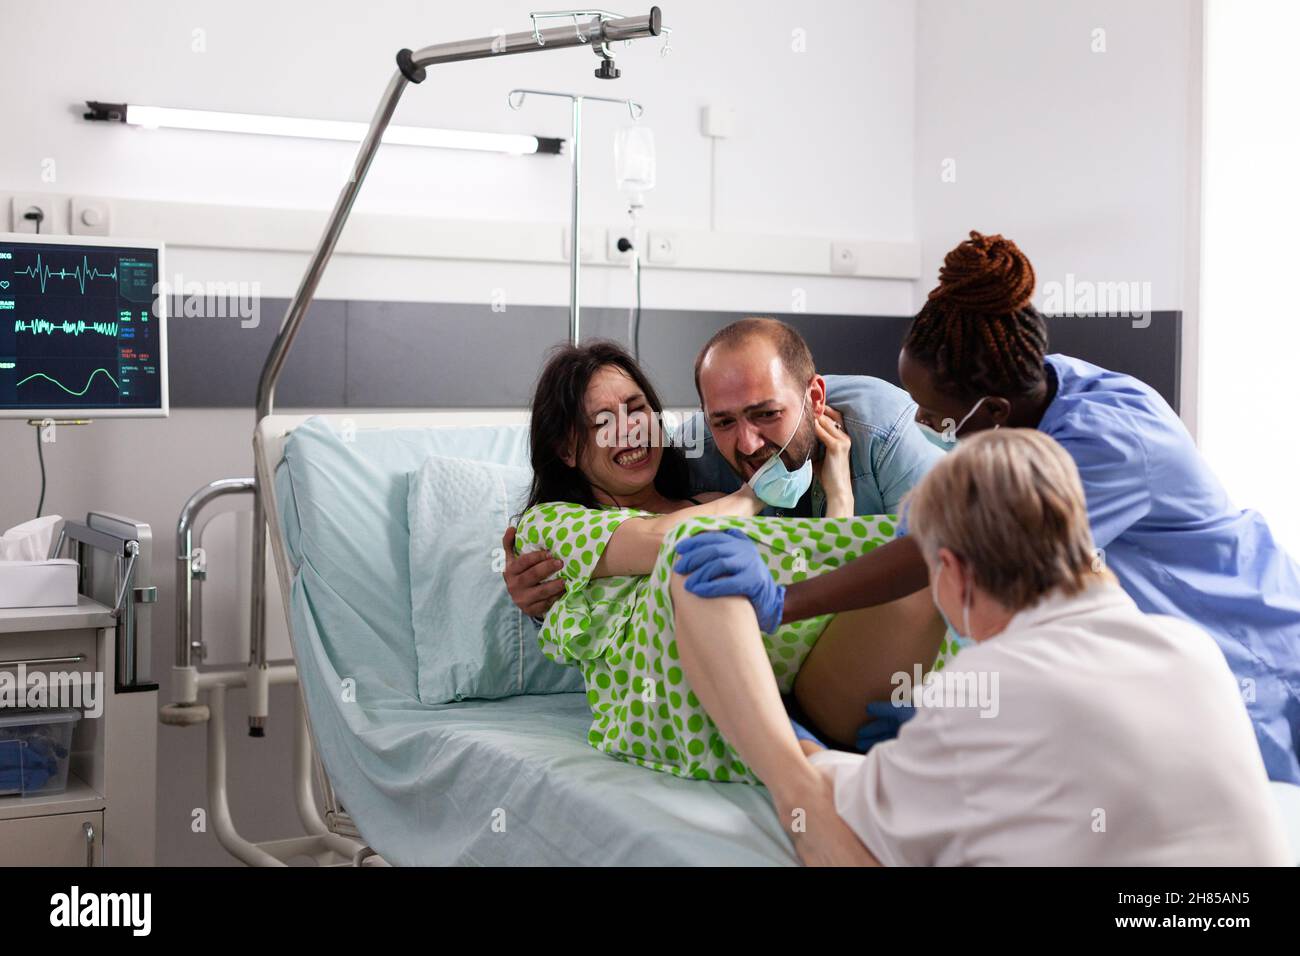 Young woman giving birth to child in hospital ward maternity with assistance from doctor and african american nurse. Multi ethnic medical team helping pregnant adult with baby delivery Stock Photo